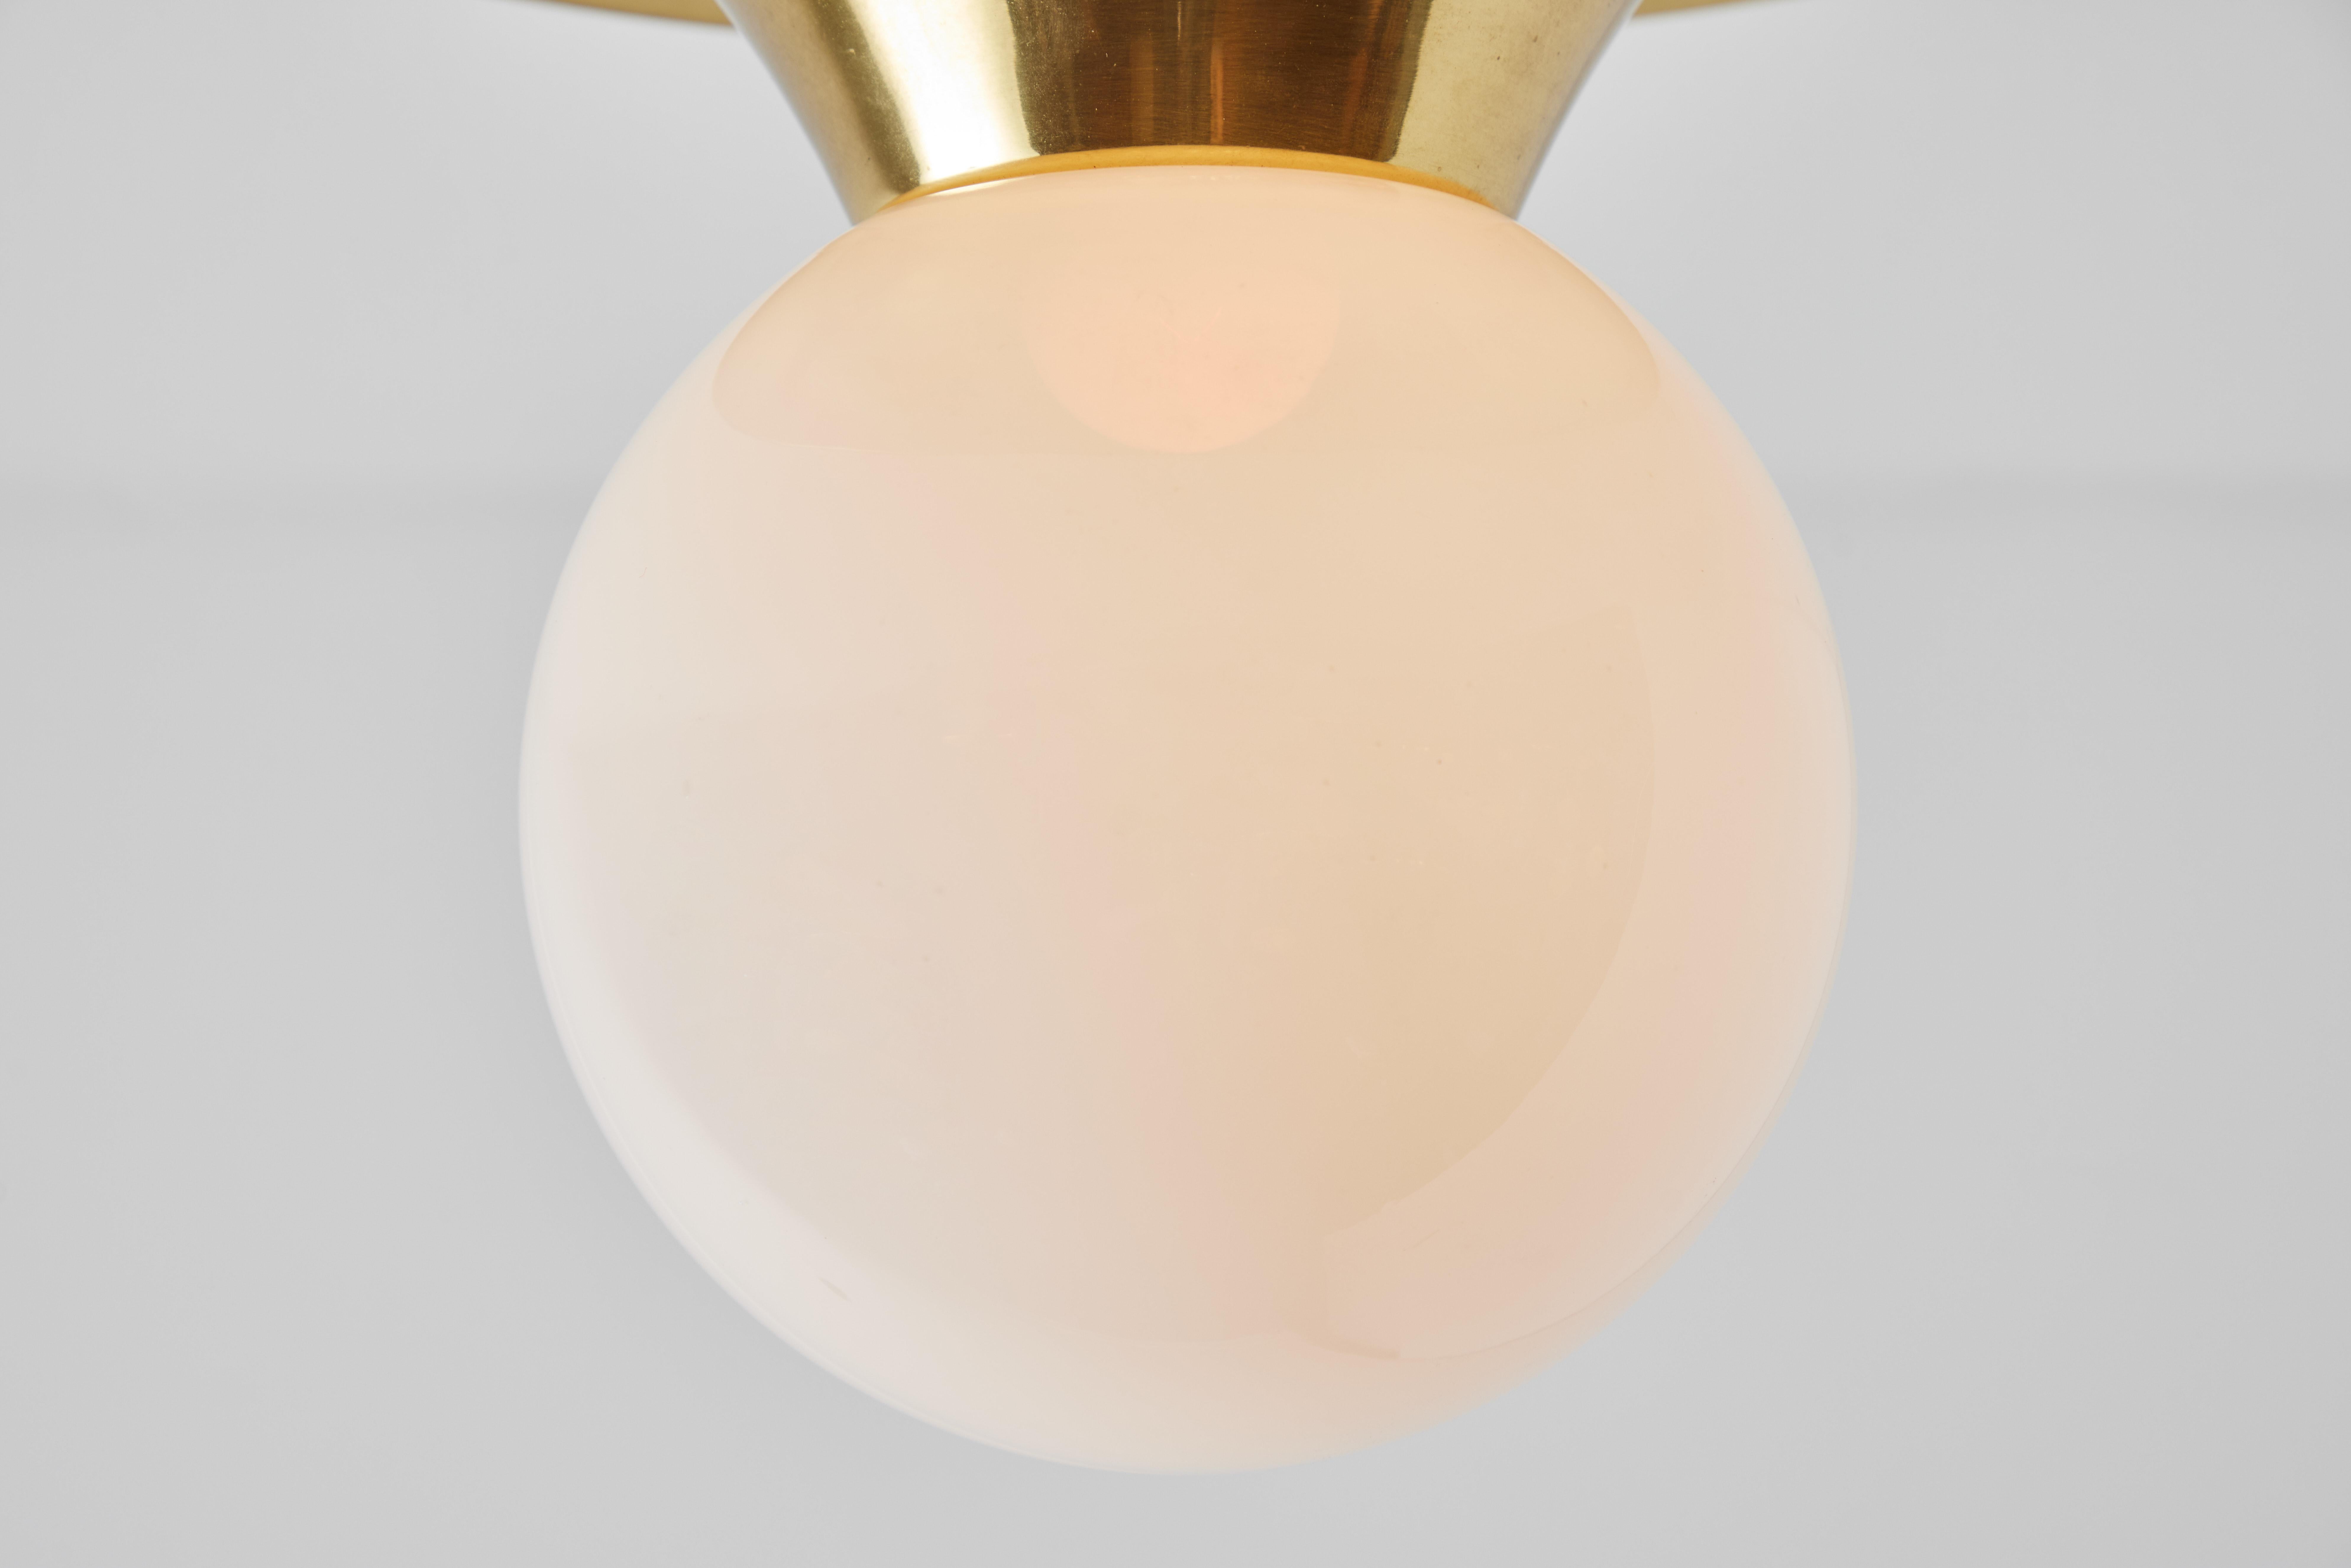 Large 1960s Achille Castiglioni & Pier Giacomo 'Light Ball' Wall or Ceiling Lamp In Good Condition For Sale In Glendale, CA